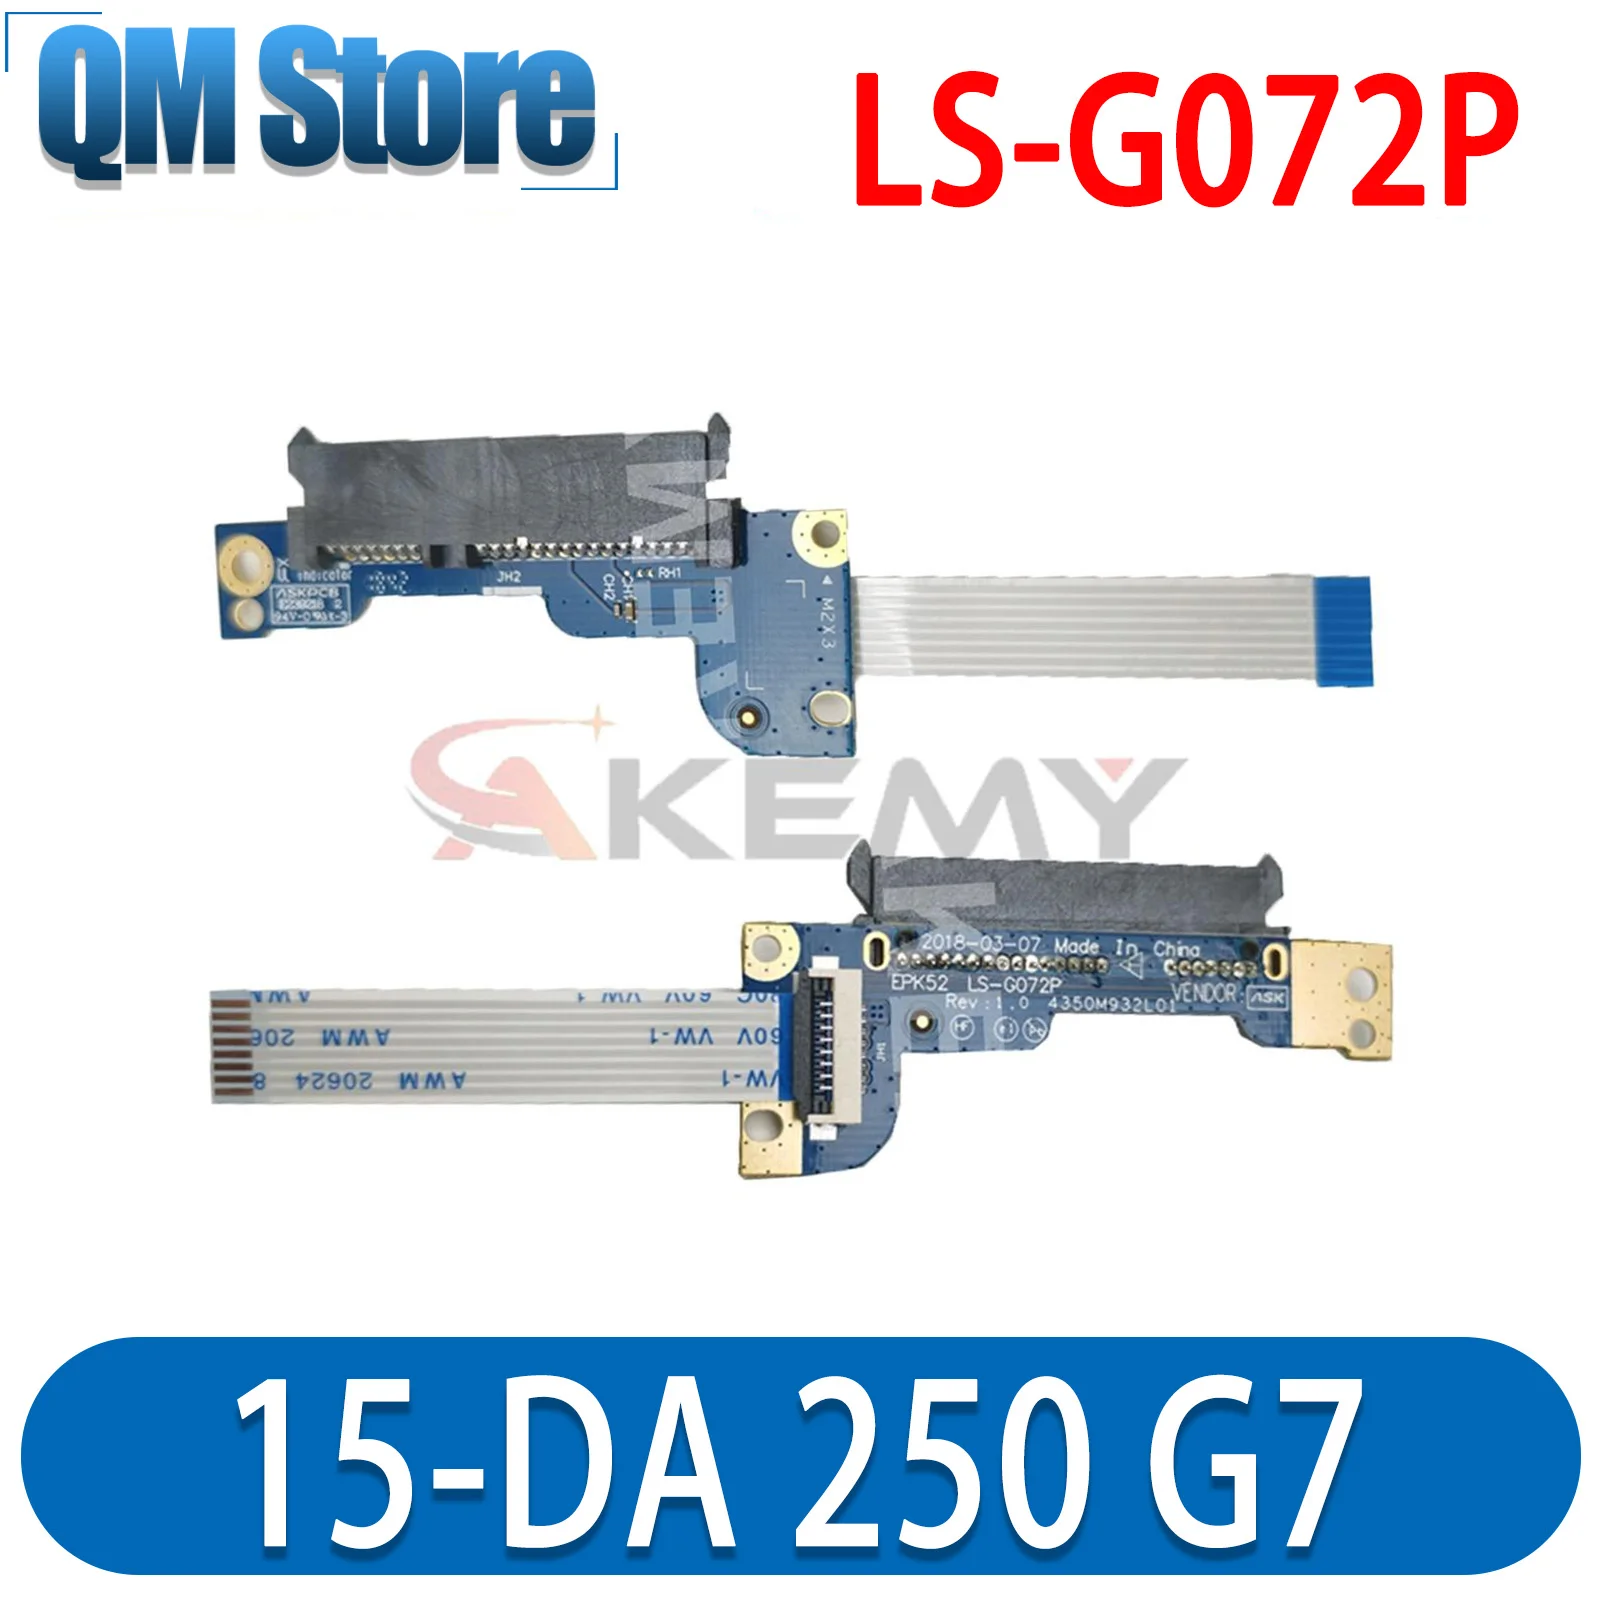 

For Hp 15-DA 15-DB 250 G7 Laptop HDD HARD DRIVE CONNECTOR CABLE BOARD LS-G072P 435OM932L01 8pin 100% Tested Fast Ship